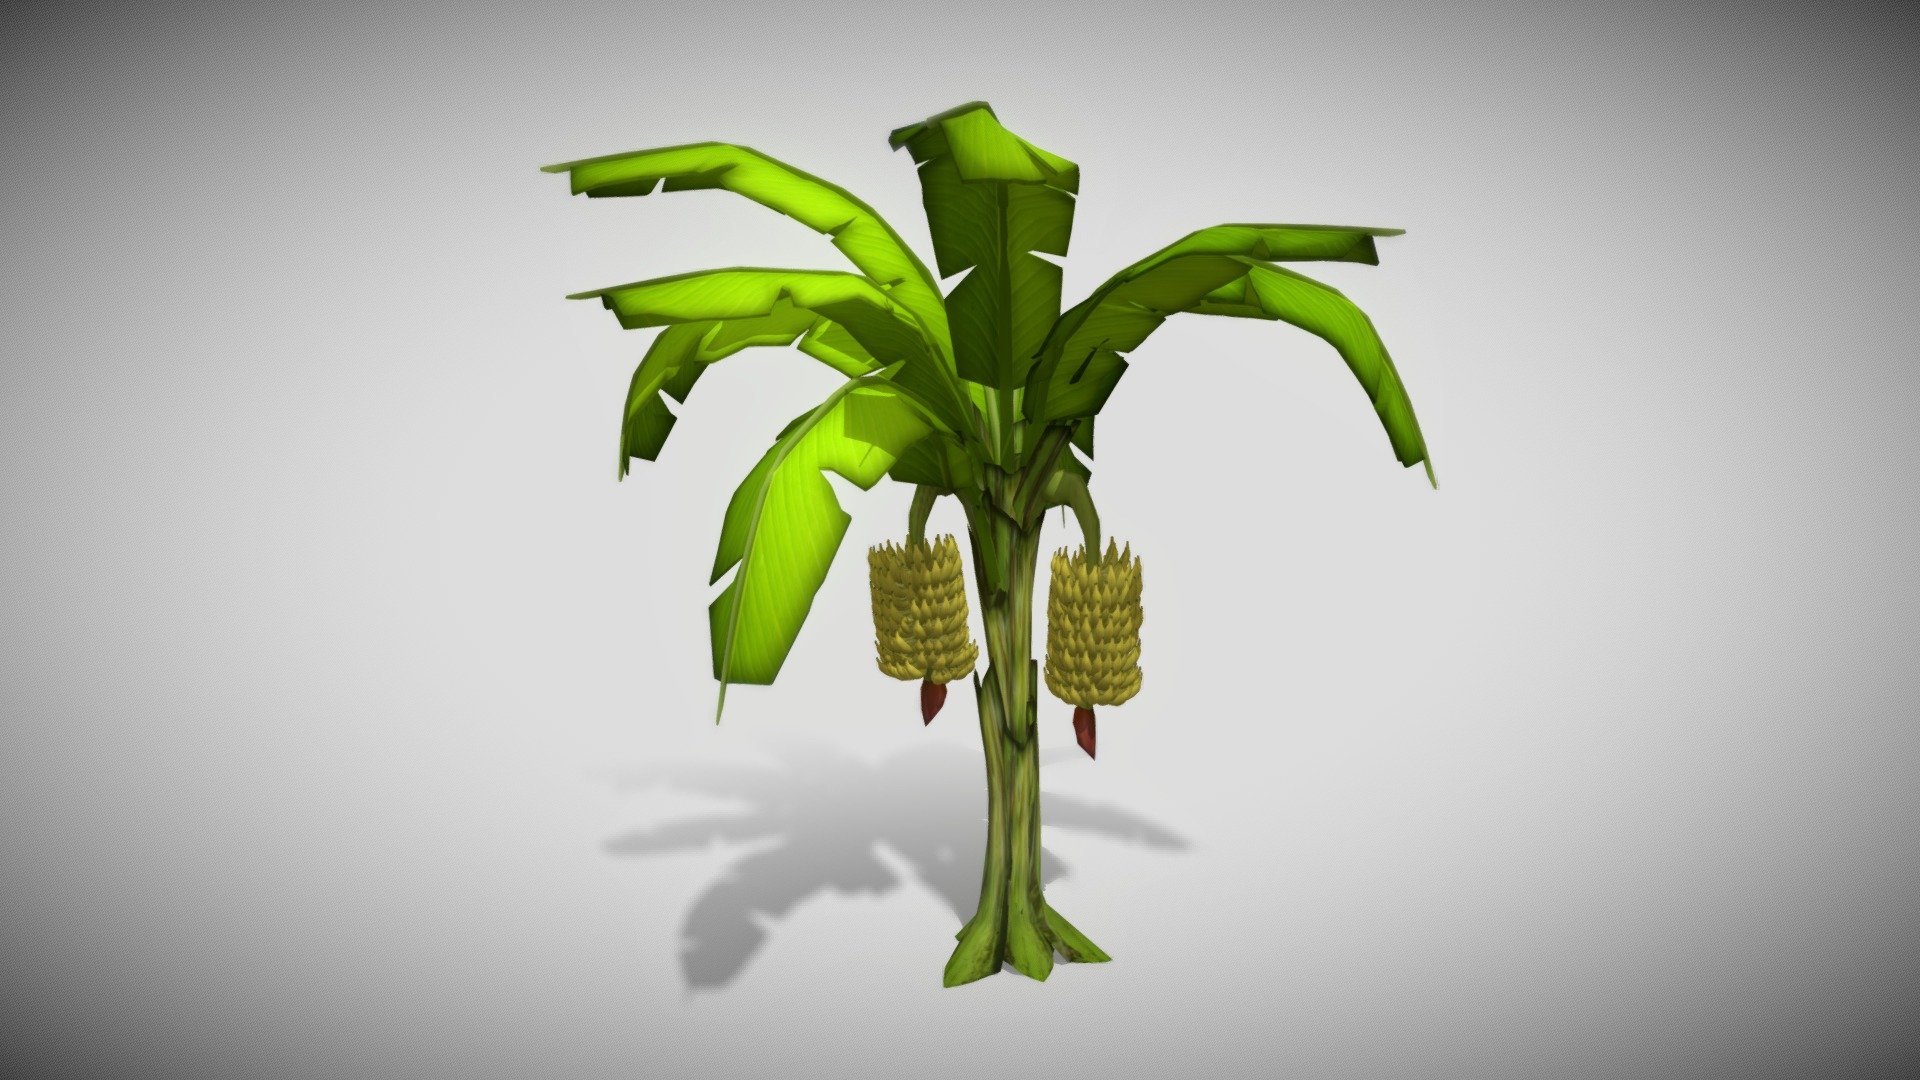 You’ll get

FBX

contact me if you wanted to make custom model

htrinurcahyo@gmail.com

im from INDONESIA - Banana Tree - 3D model by ubnilluminati 3d model